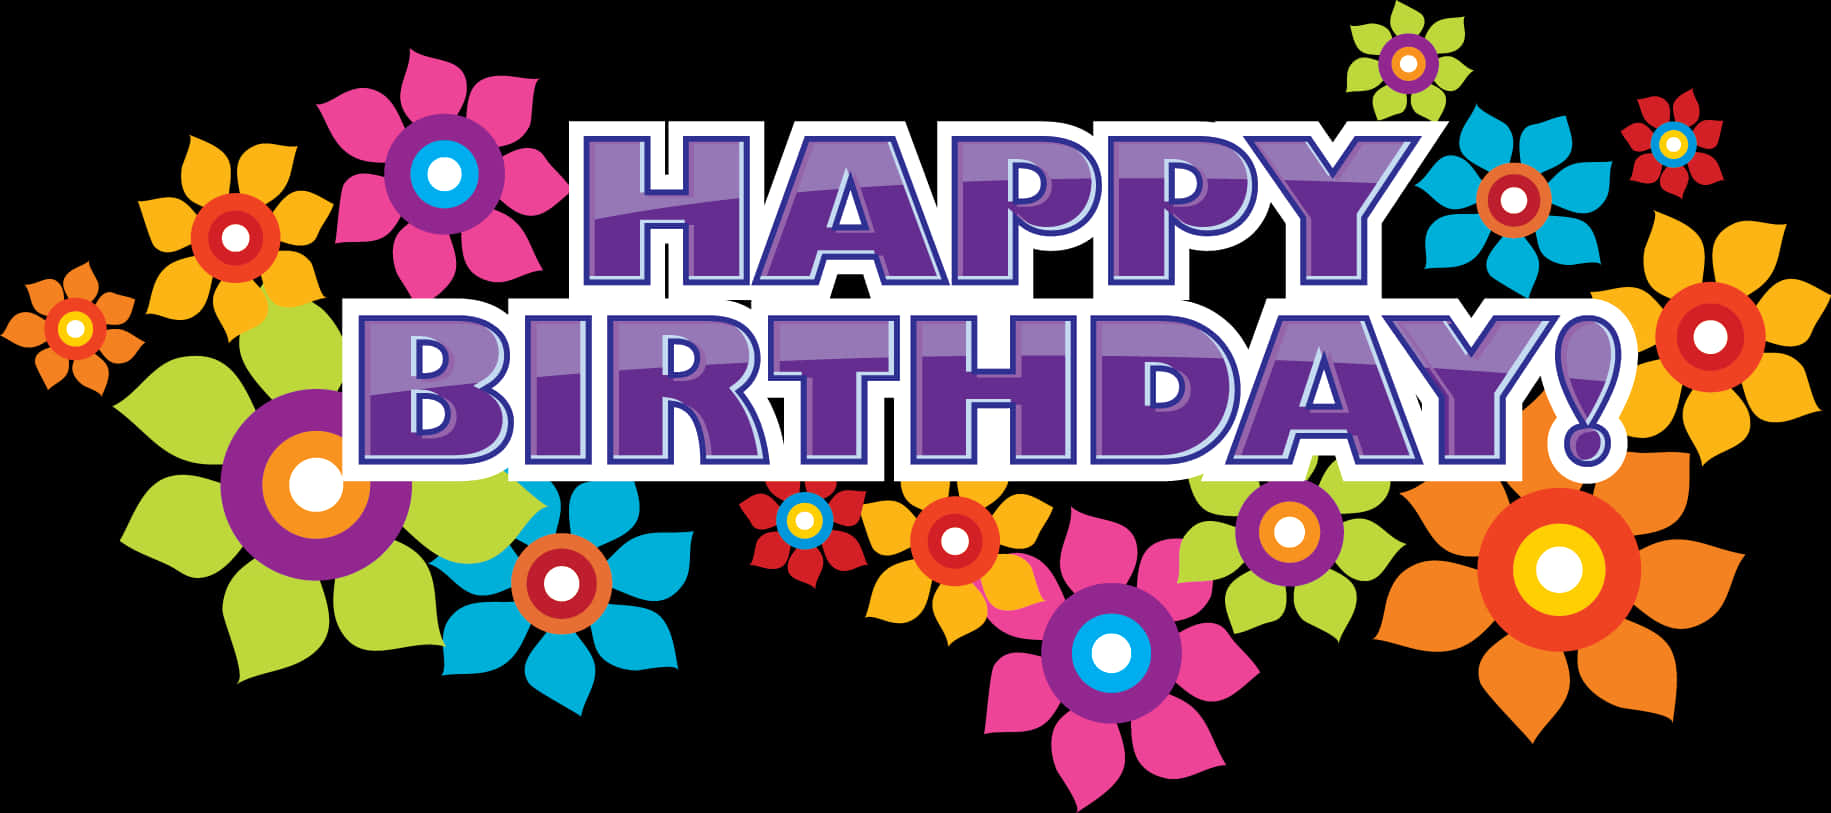 Colorful Happy Birthday Floral Design PNG image